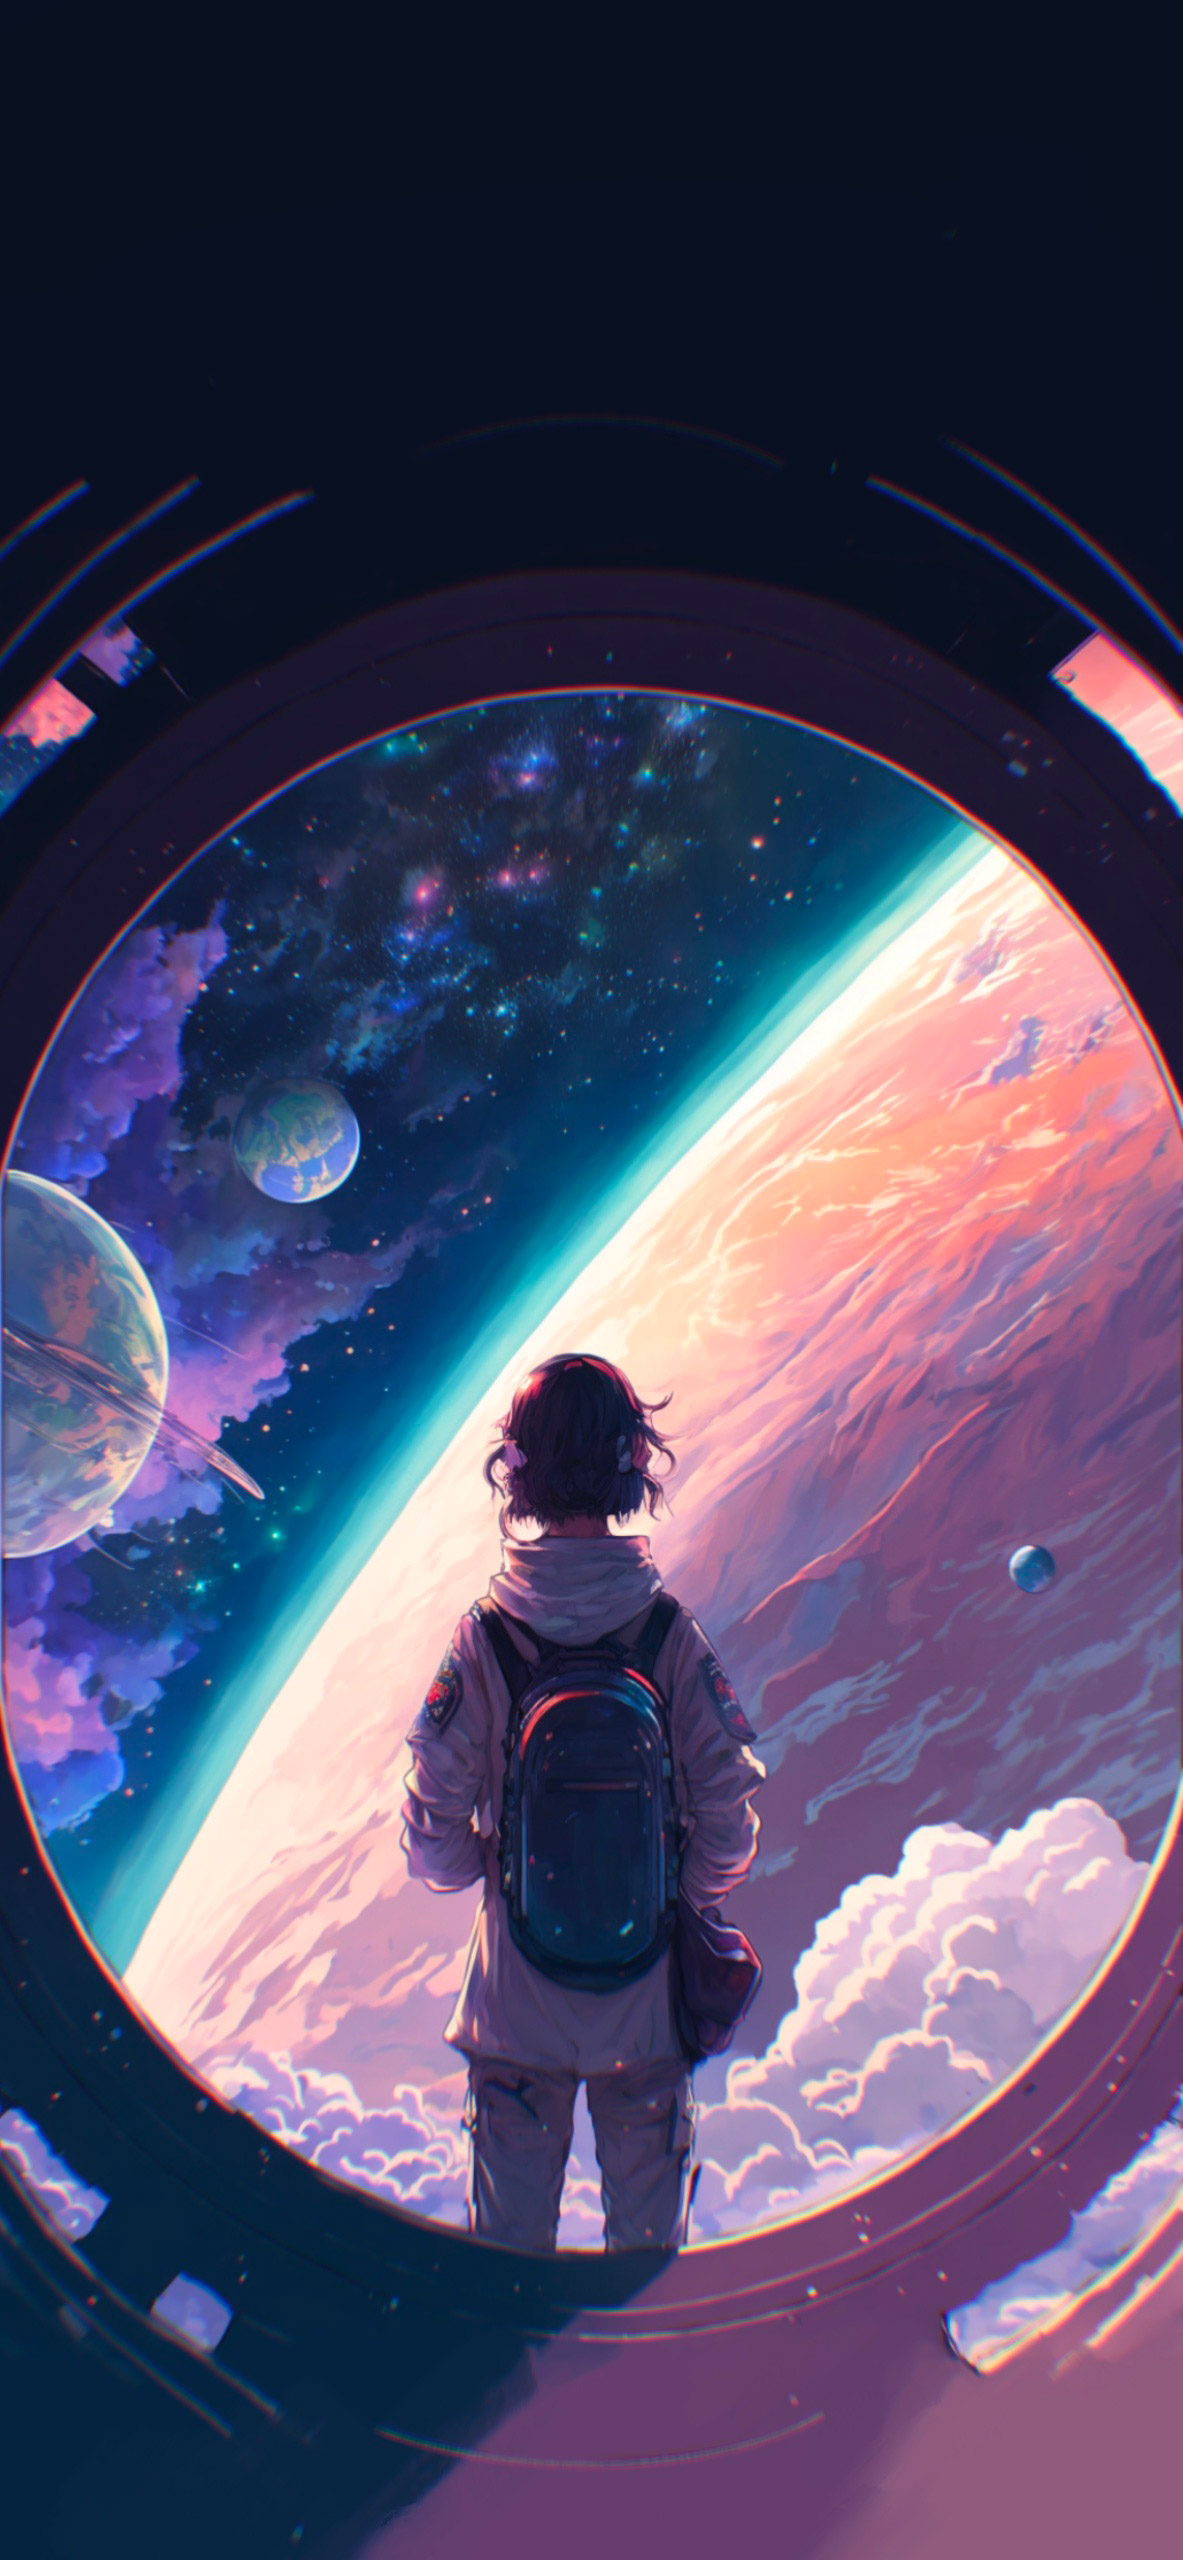 Space-Themed Wallpaper From Out Of This World